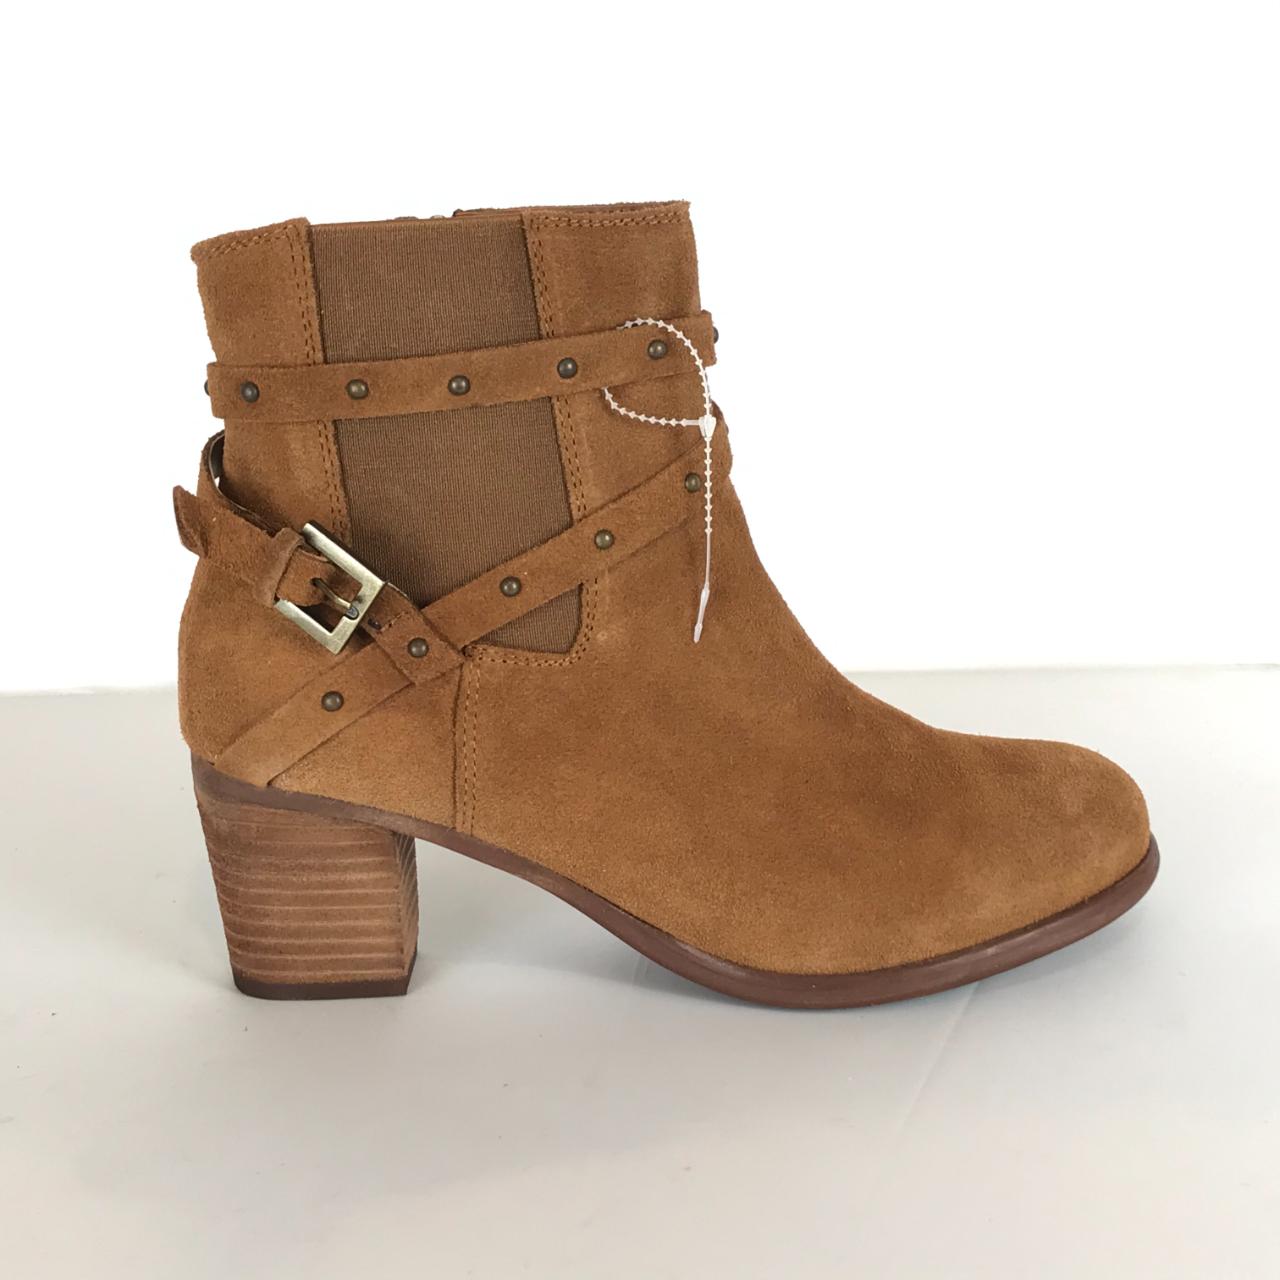 Product Image 2 - Camryn Suede Studded Ankle Boots
Matisse

Brand